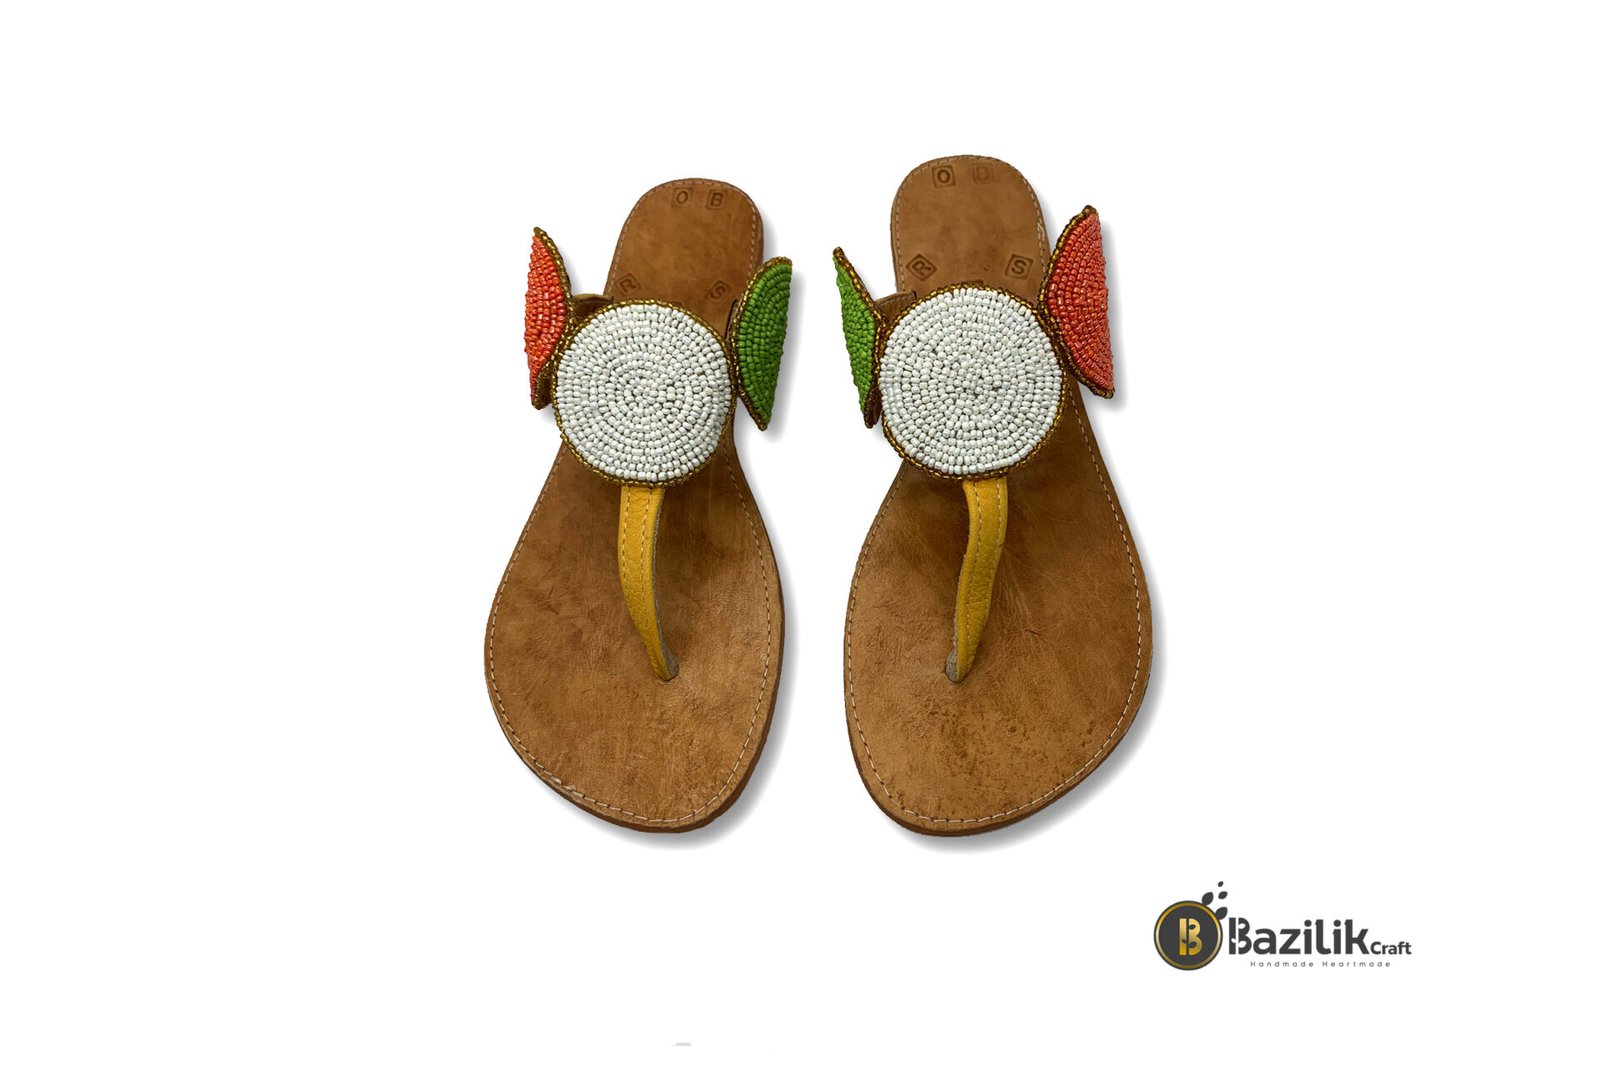 Comfortable Black Flipkart Sandals For Women White, Red, And Yellow Slides  For Home, Hotel, Beach Available In Sizes 35 40 02939920 From Blazershoe,  $7.94 | DHgate.Com